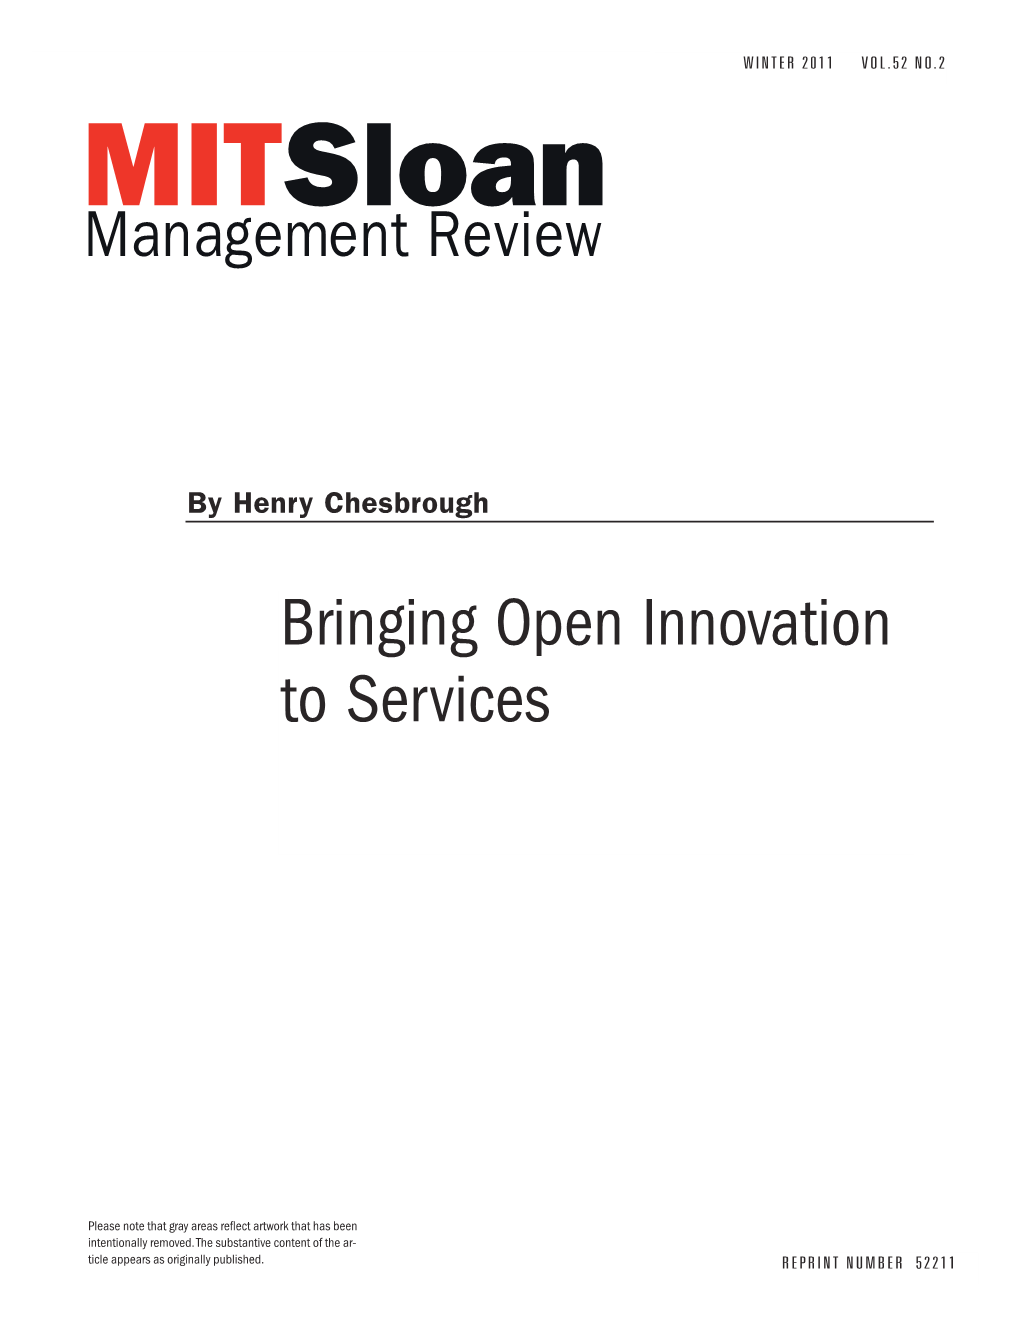 Bringing Open Innovation to Services